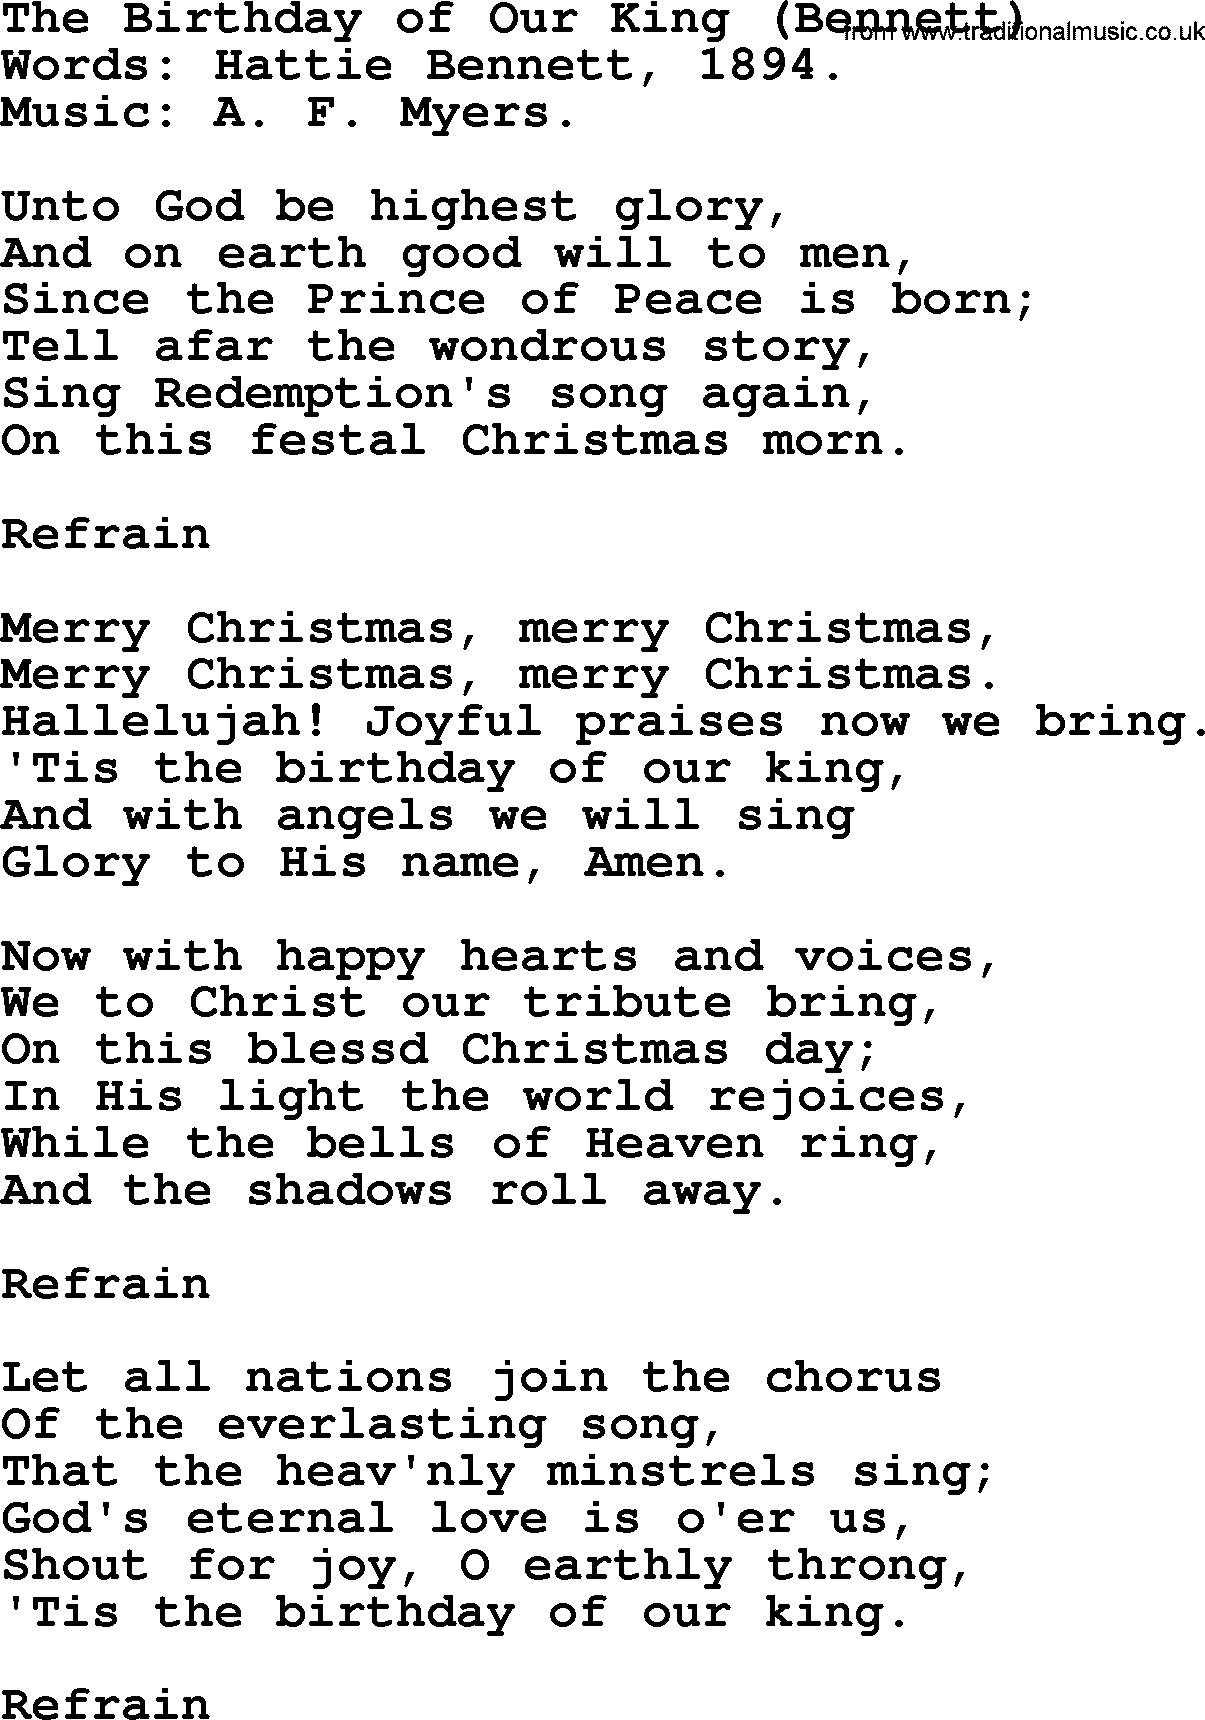 Christmas Hymns, Carols and Songs, title: The Birthday Of Our King (bennett), lyrics with PDF